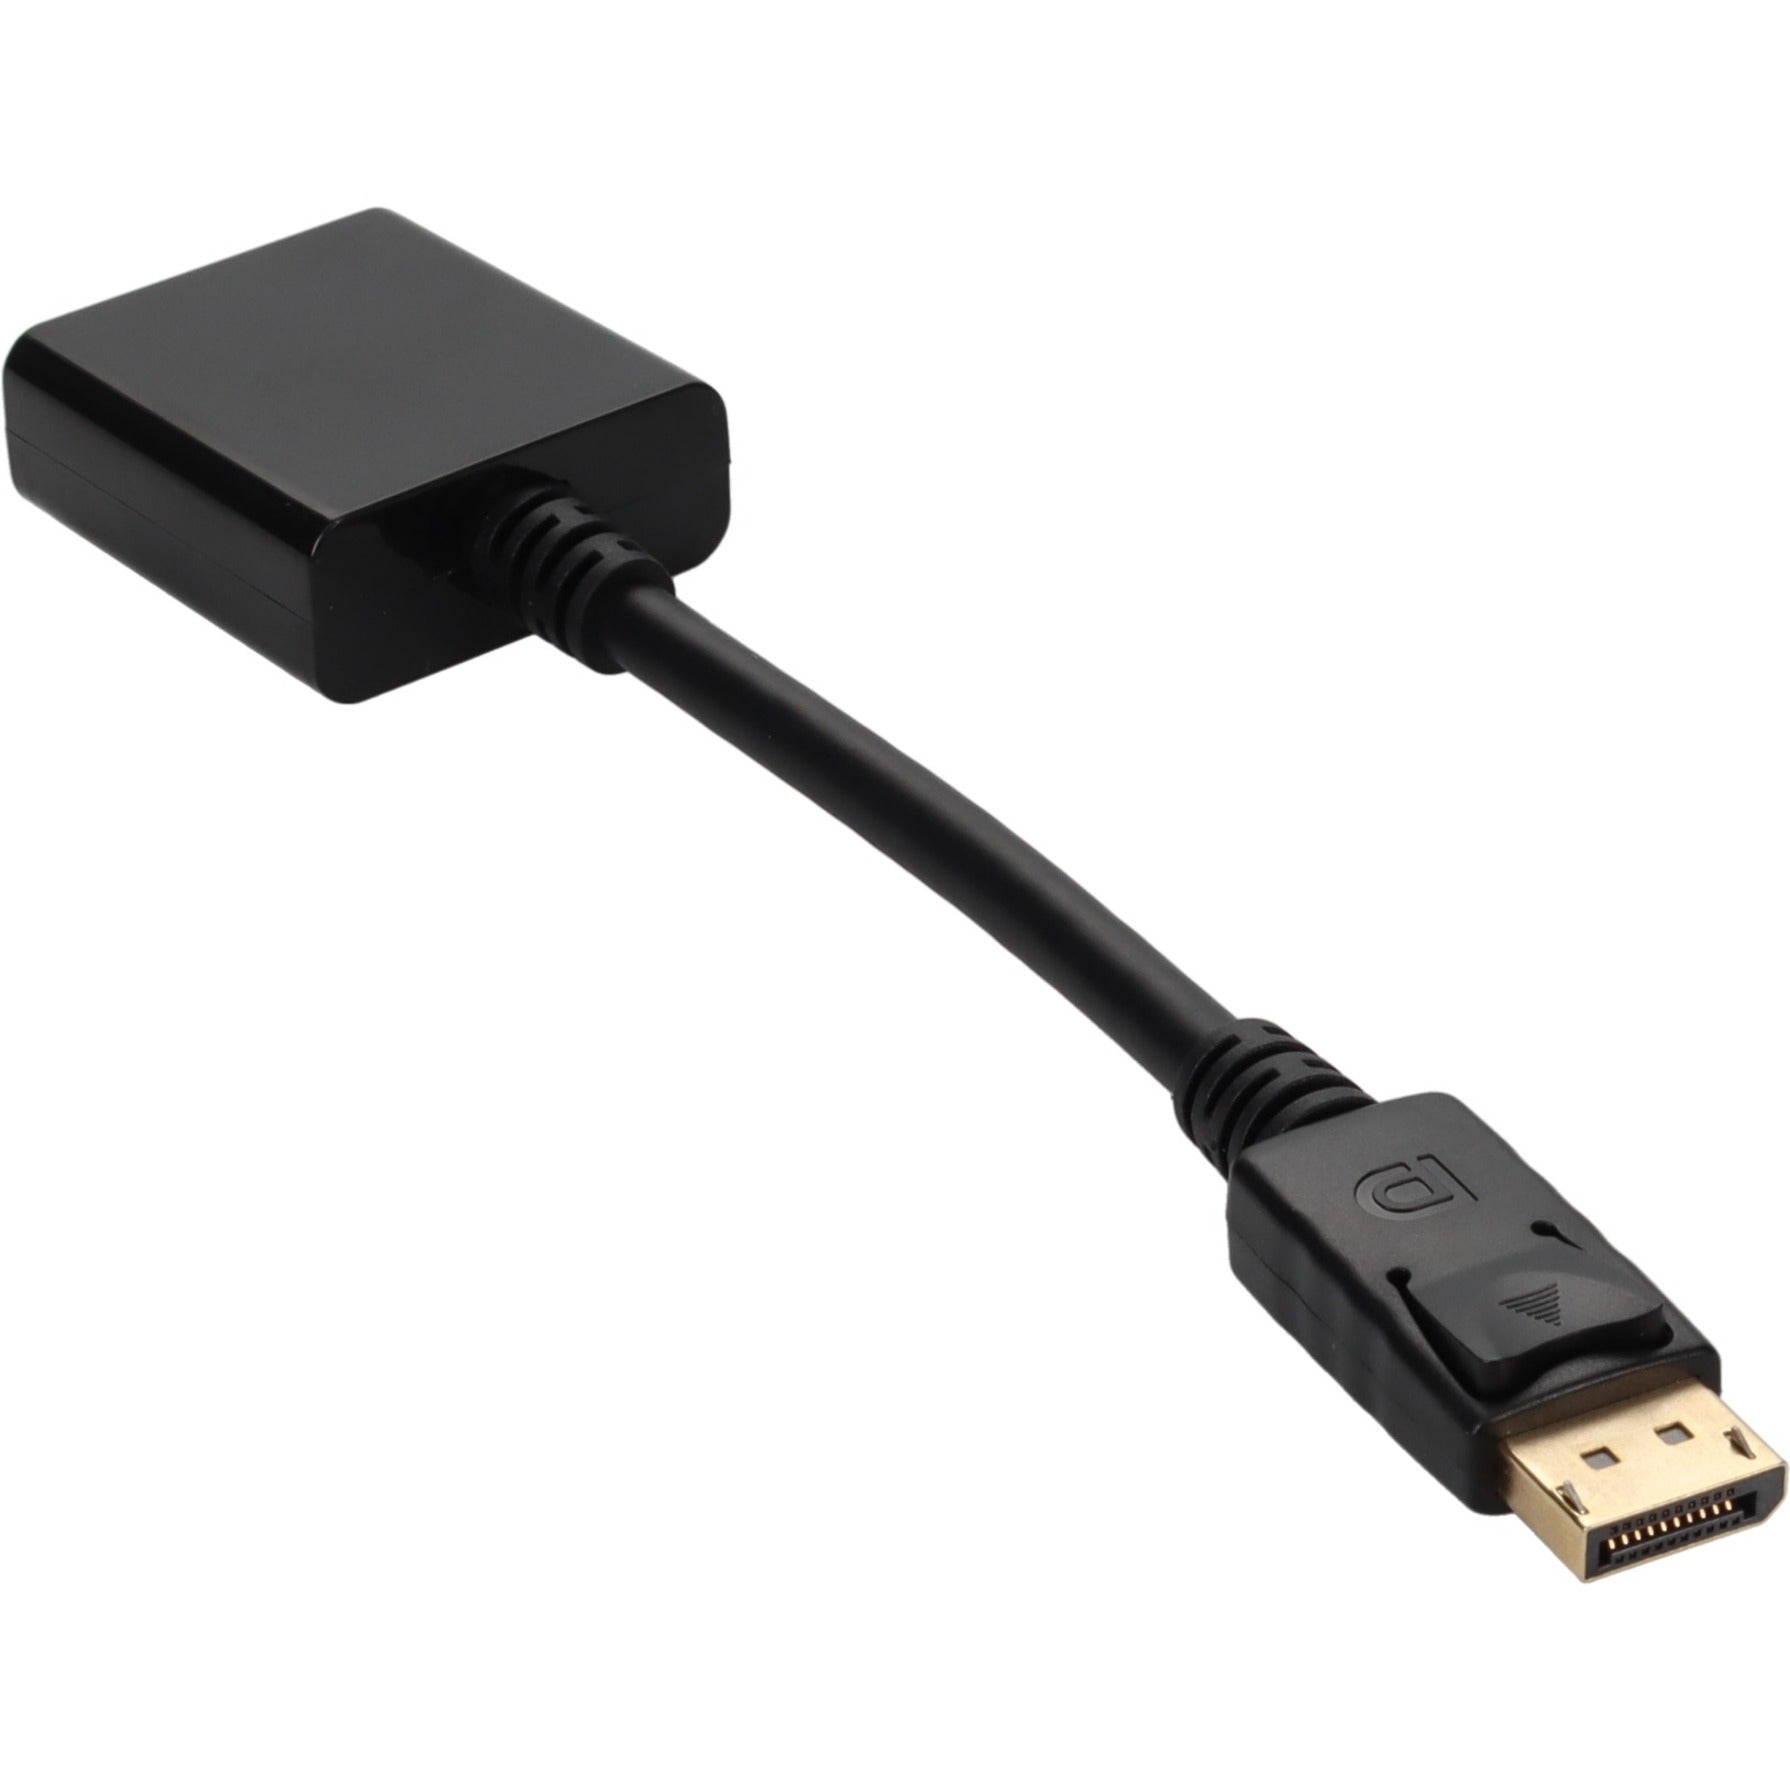 AddOn DISPLAYPORT2DVI DisplayPort to DVI Adapter Converter Cable - Male to Female, Video Cable